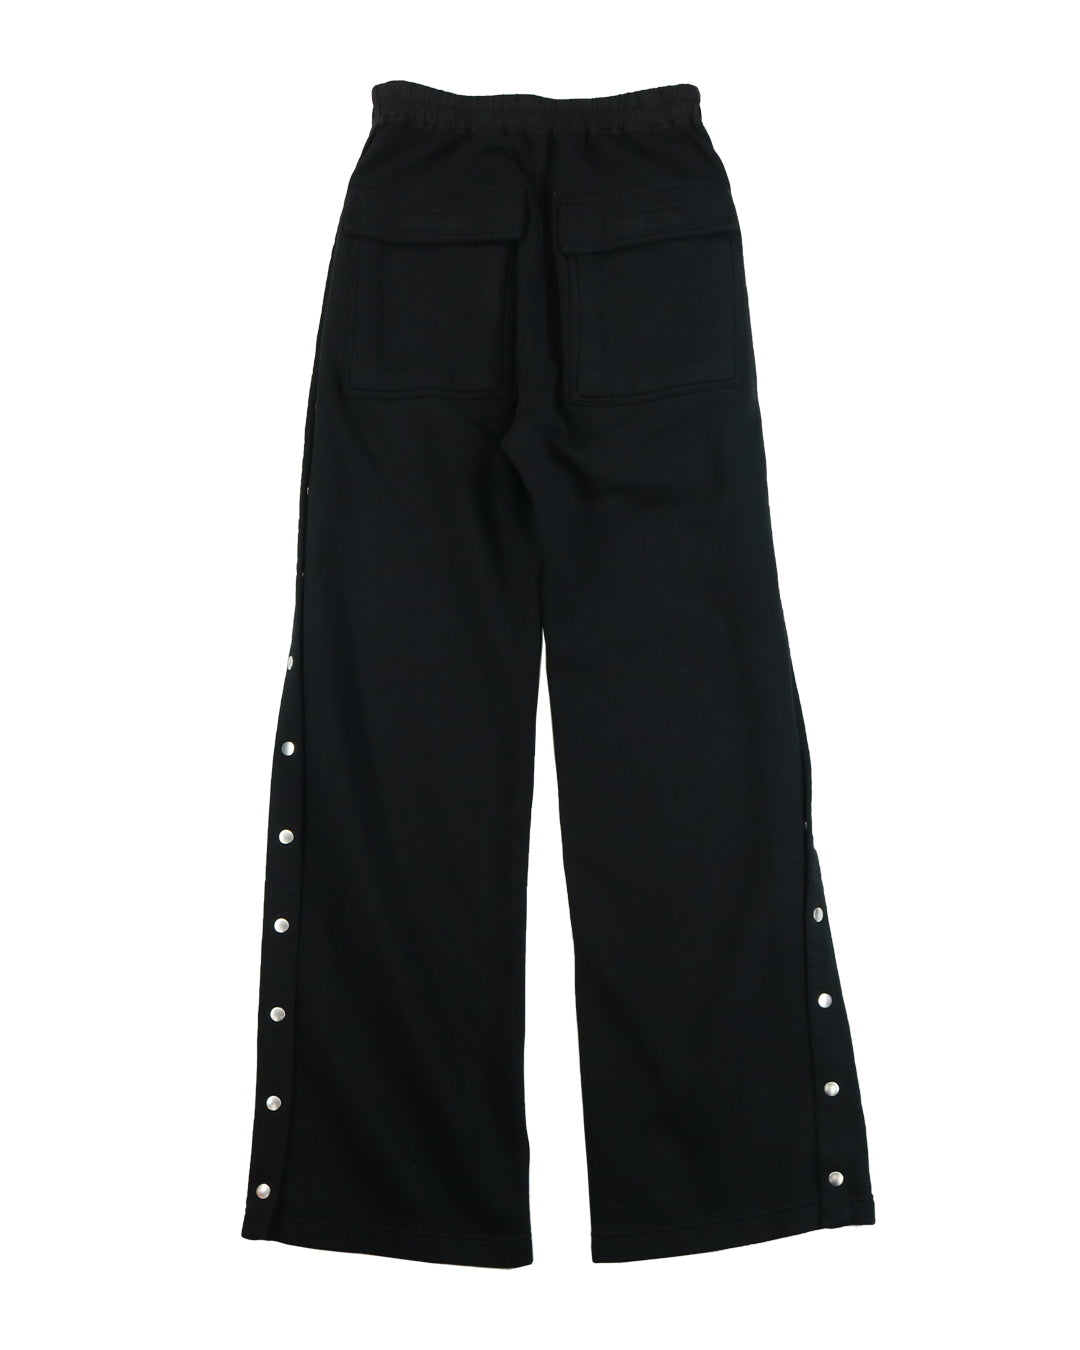 Rick Owens Drkshdw PUSHER PANTS – THE GALLERY BOX